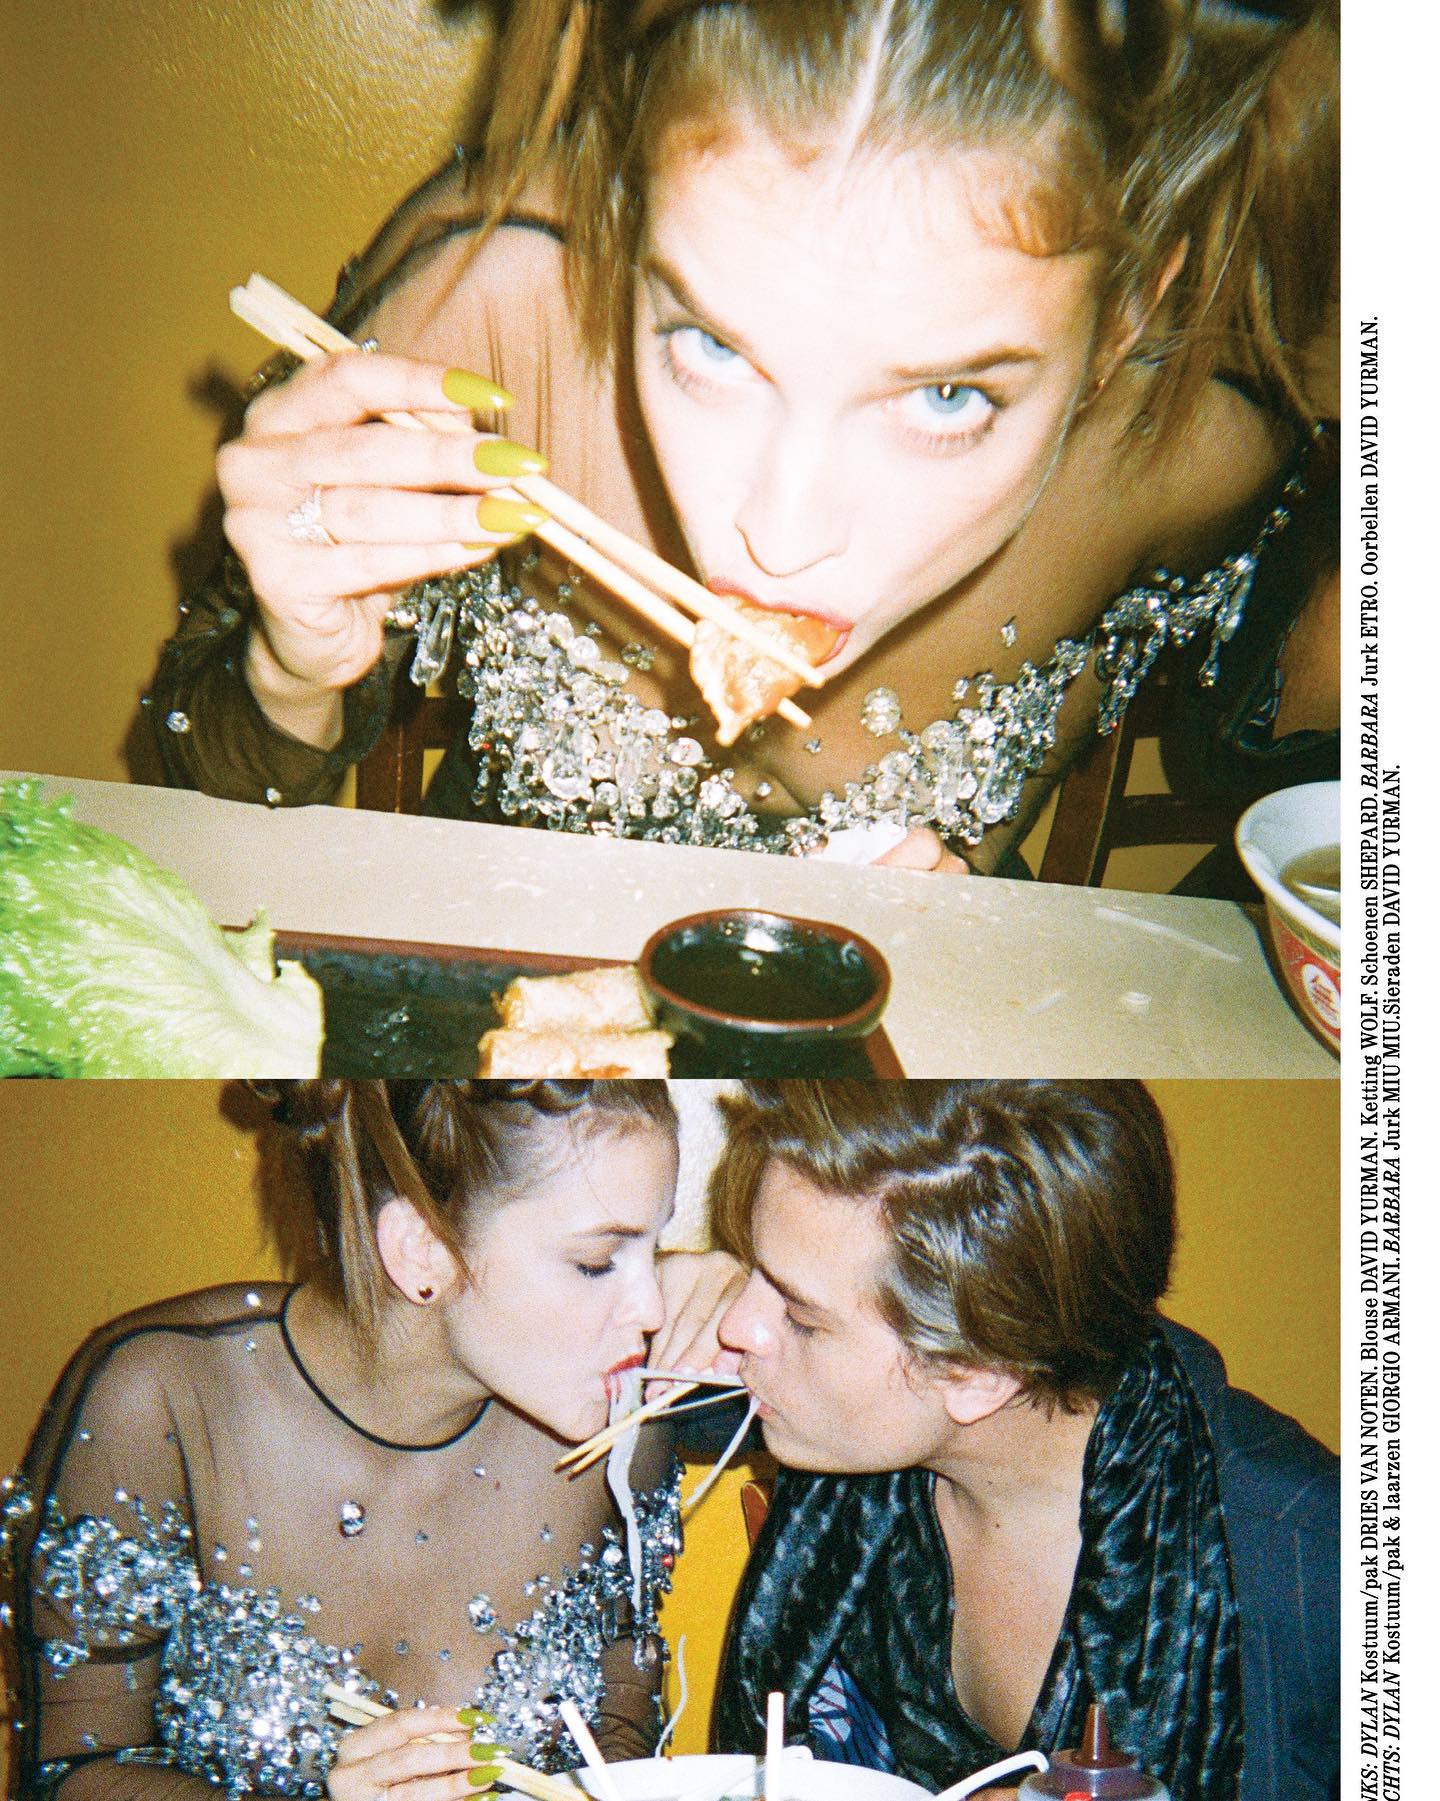 Fotos n°14 : Barbara Palvin y Dylan Sprouse Hit the Cover!